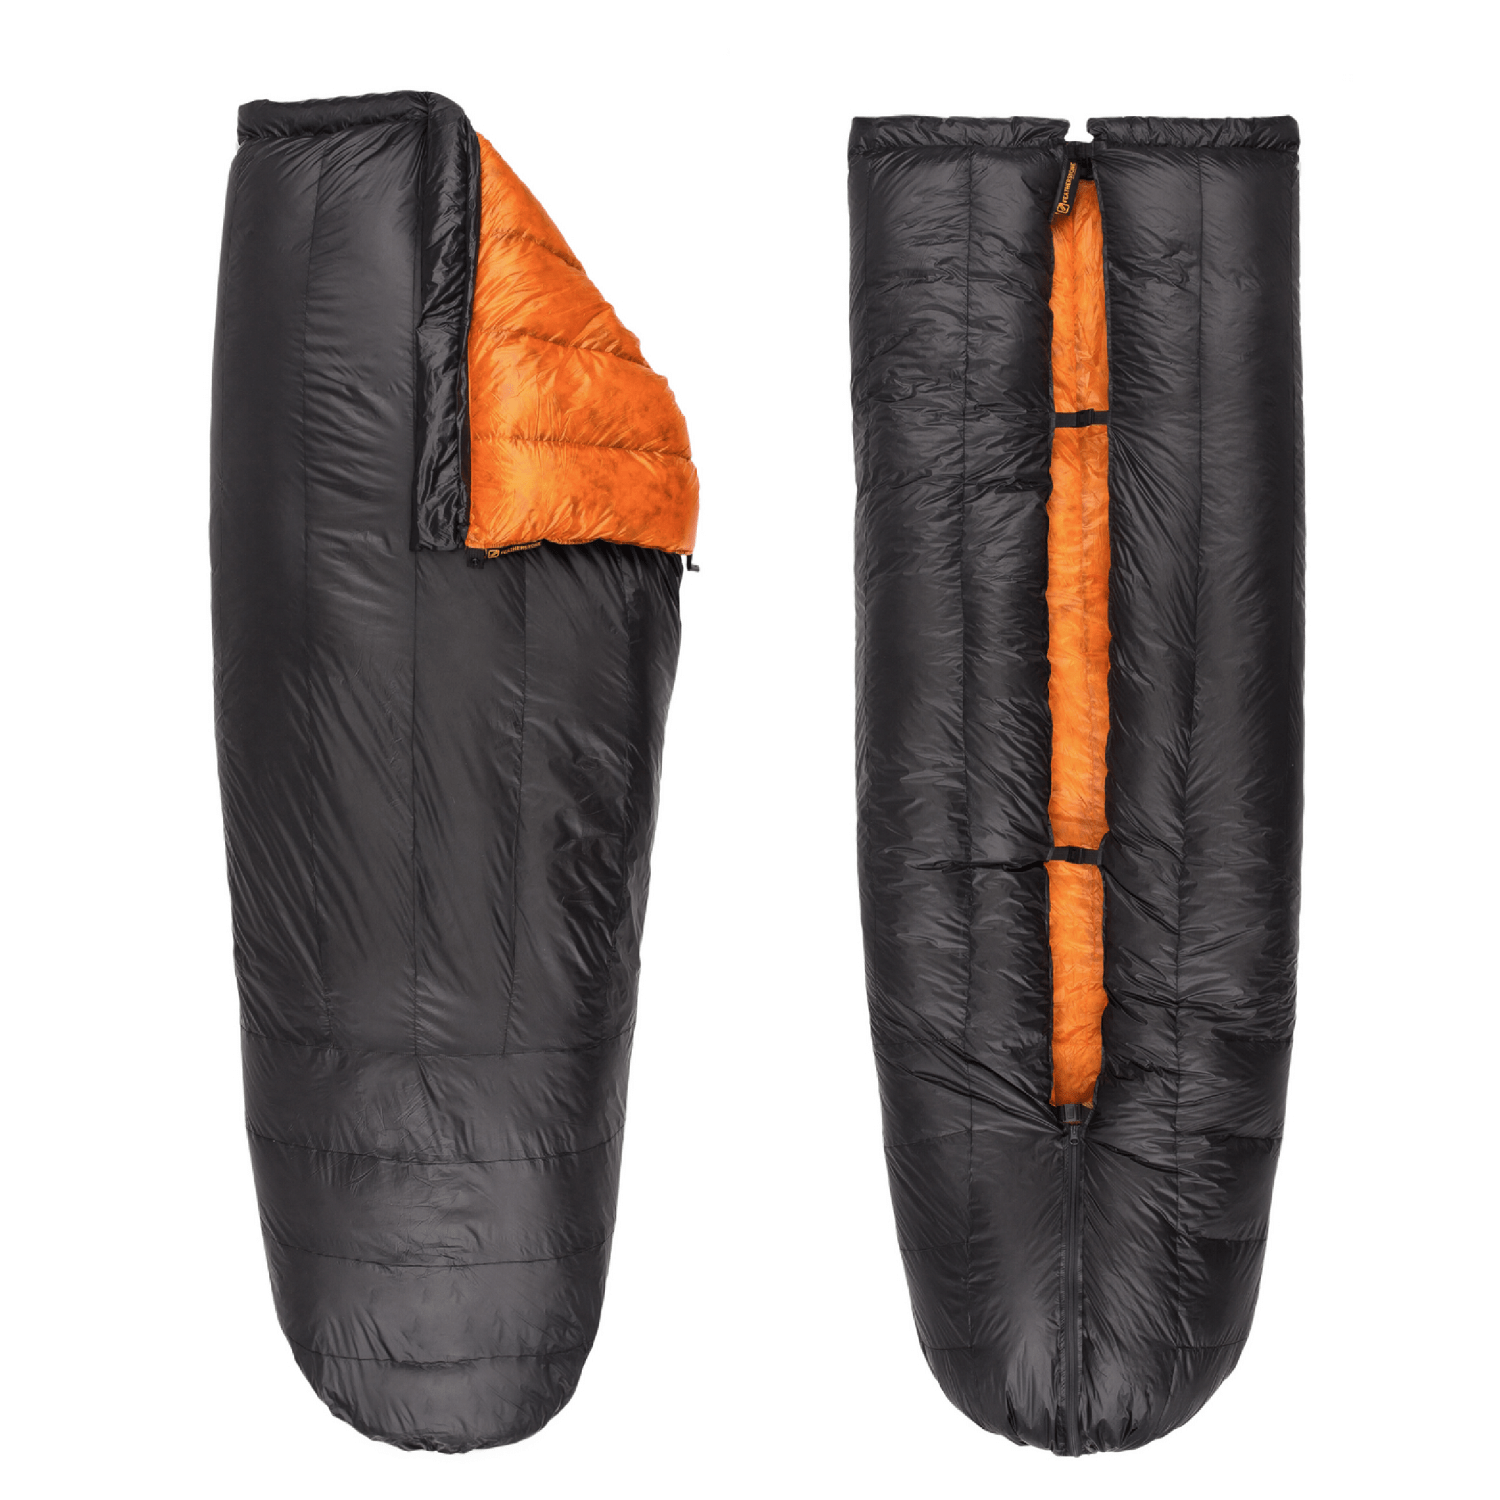 Featherstone | Camping Top Quilt Water Repellant Down Blanket- Moondance 25, Camping Quilt, Featherstone, Defiance Outdoor Gear Co.